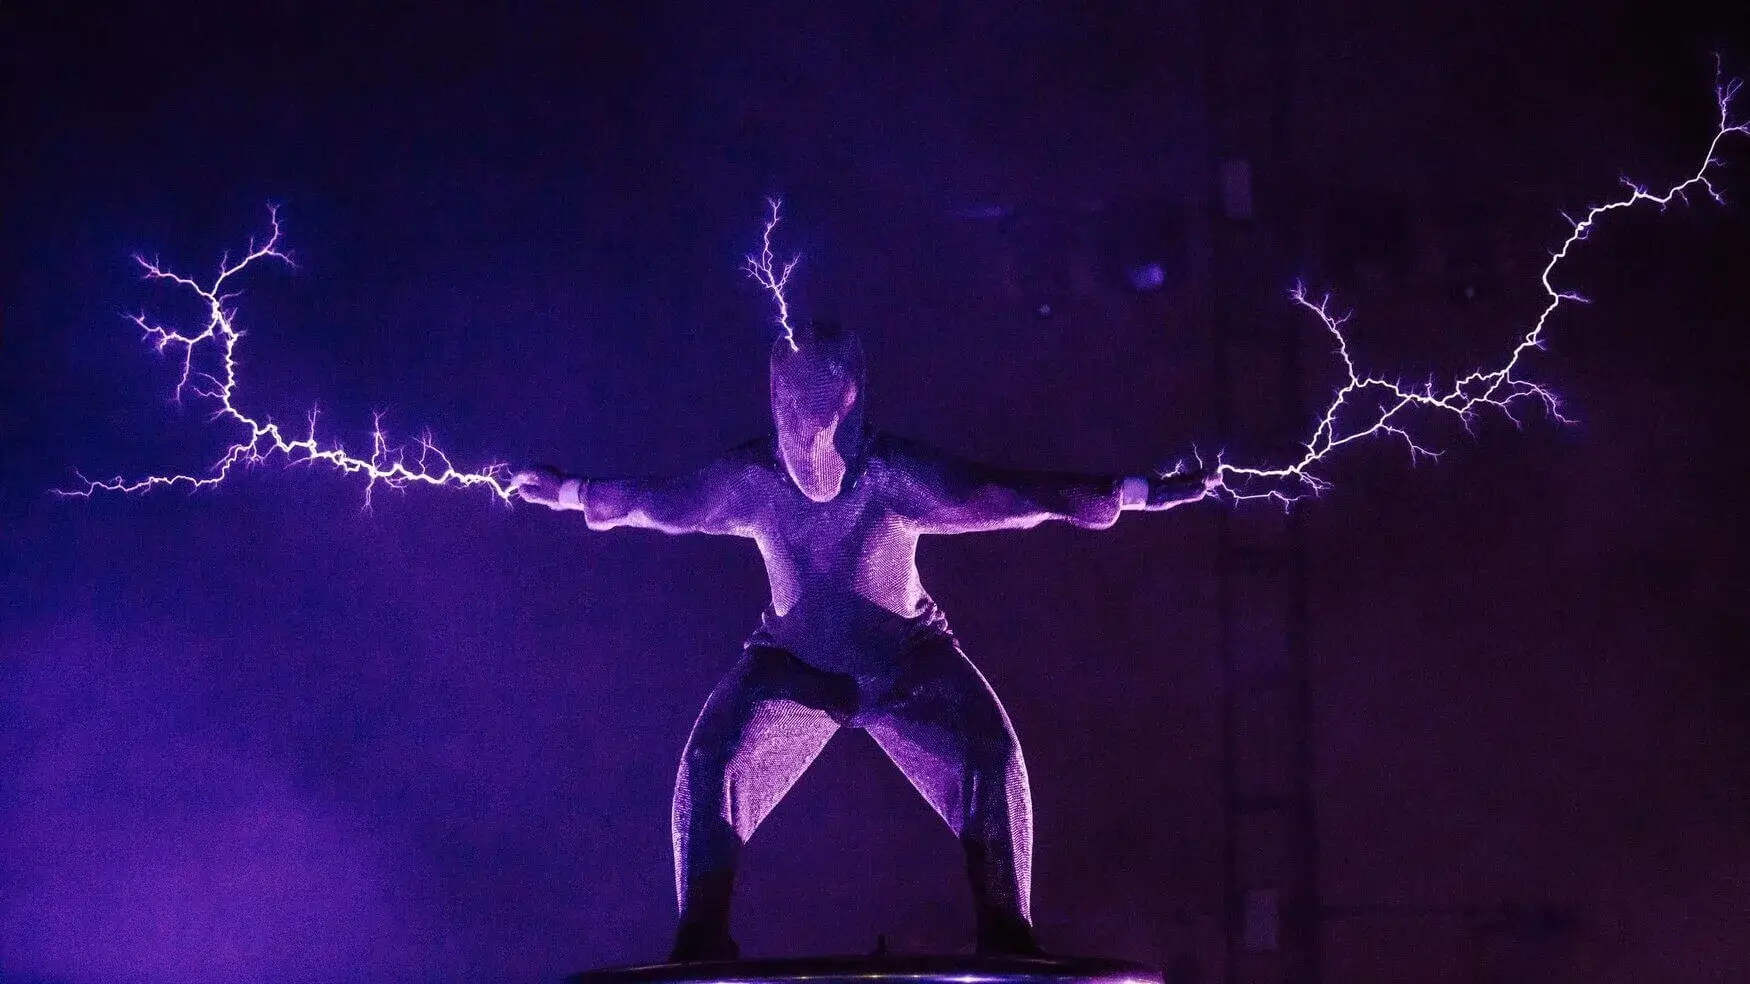 Wilderness festival performance photo showing person in chain-mail suit with electricity sparks coming out from head and hands.